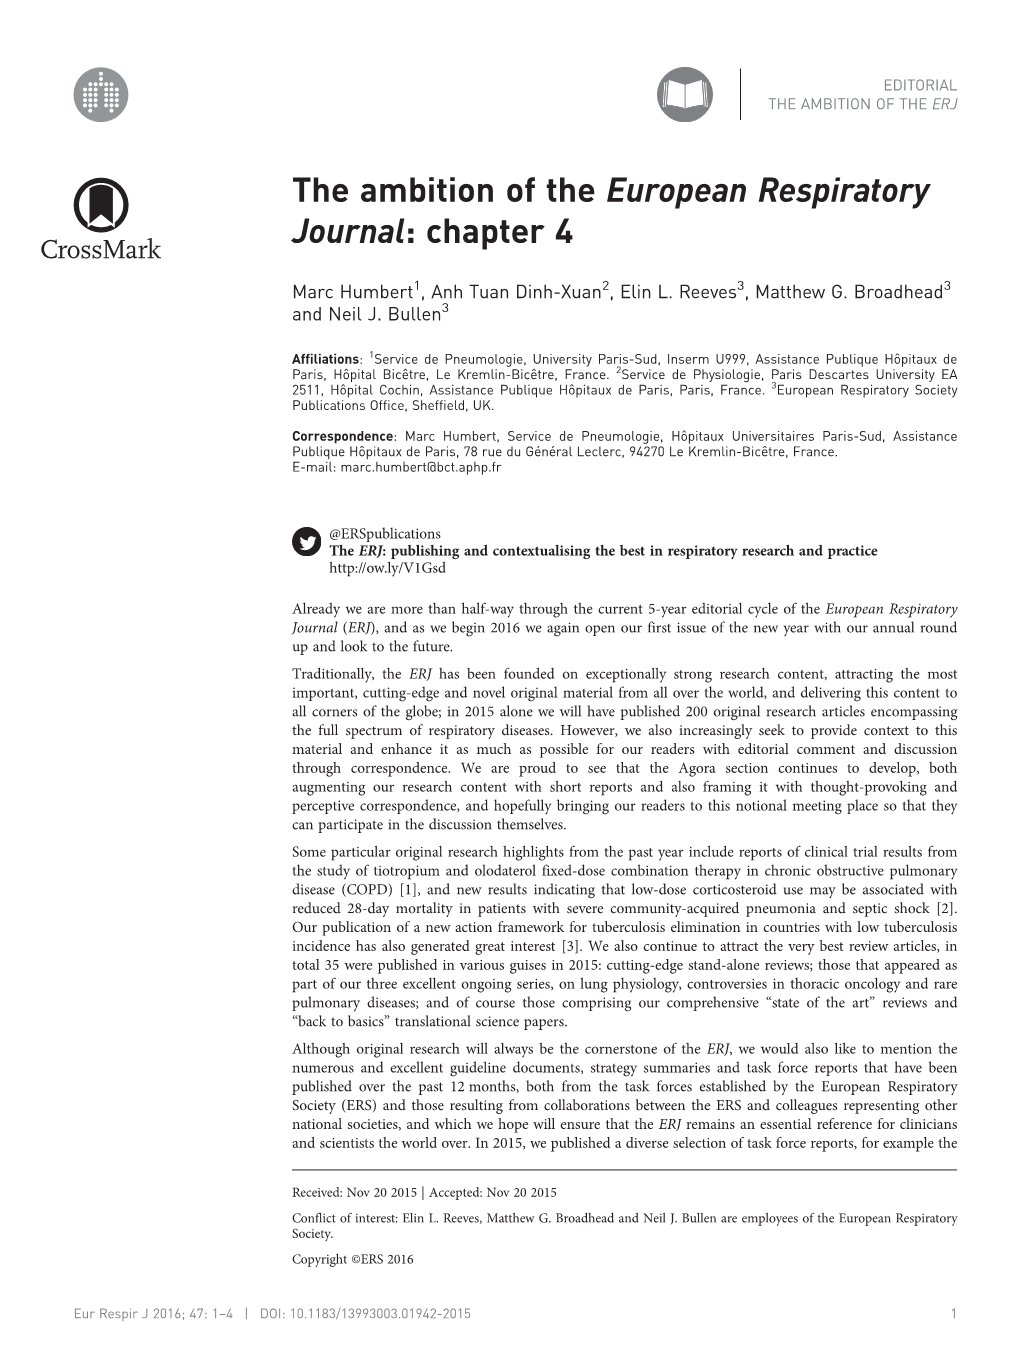 The Ambition of the European Respiratory Journal: Chapter 4